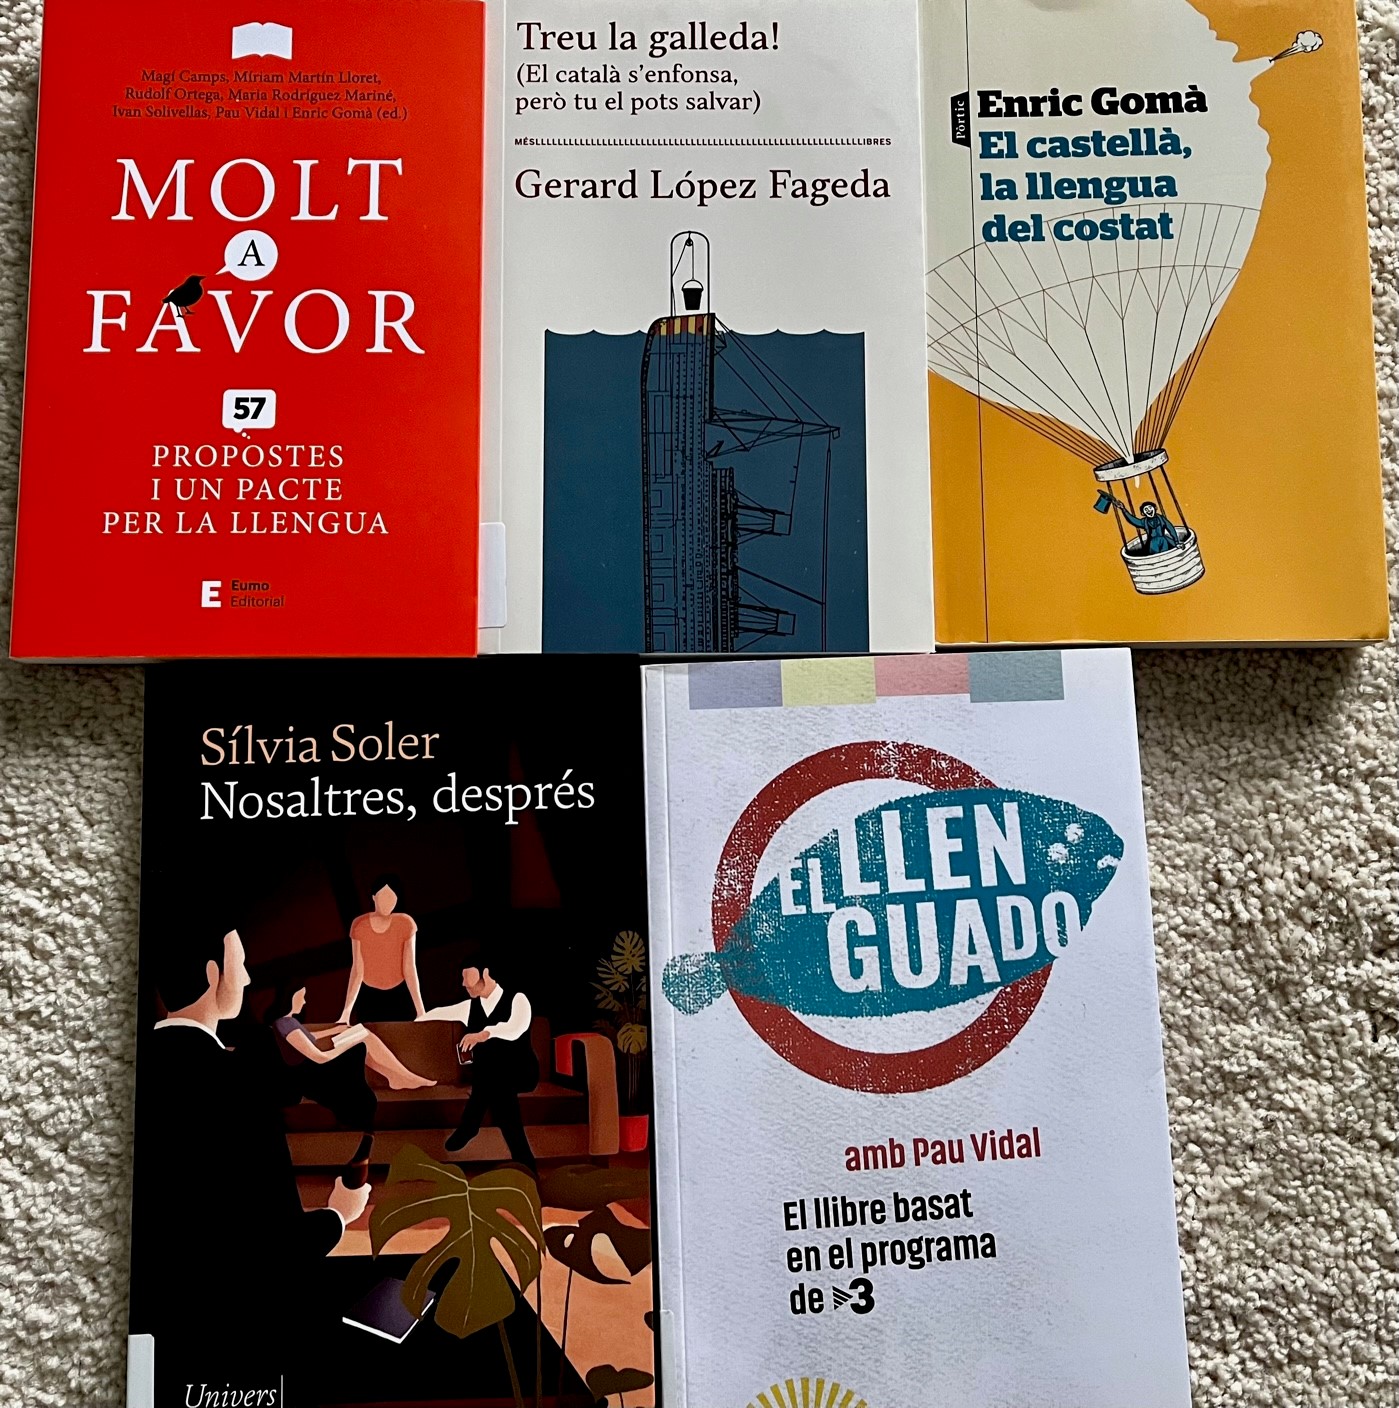 Photo of several books in Catalan